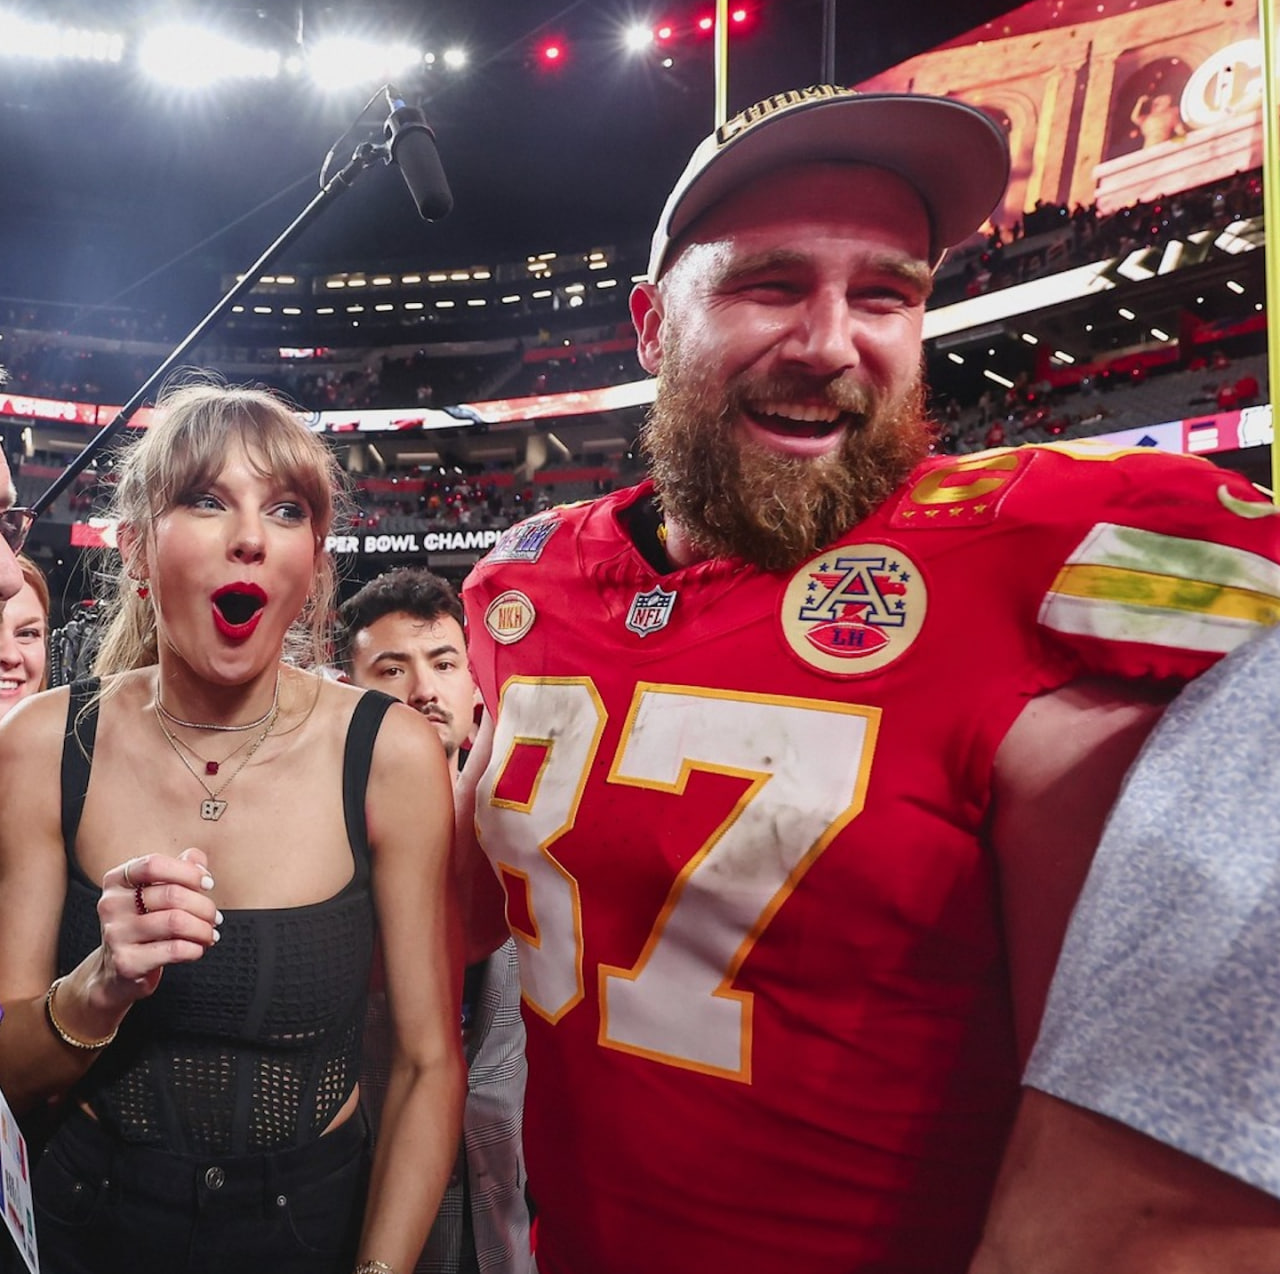 Taylor Swift showed her all-out support for her boyfriend and the Kansas City Chiefs’ tight end, Travis Kelce.